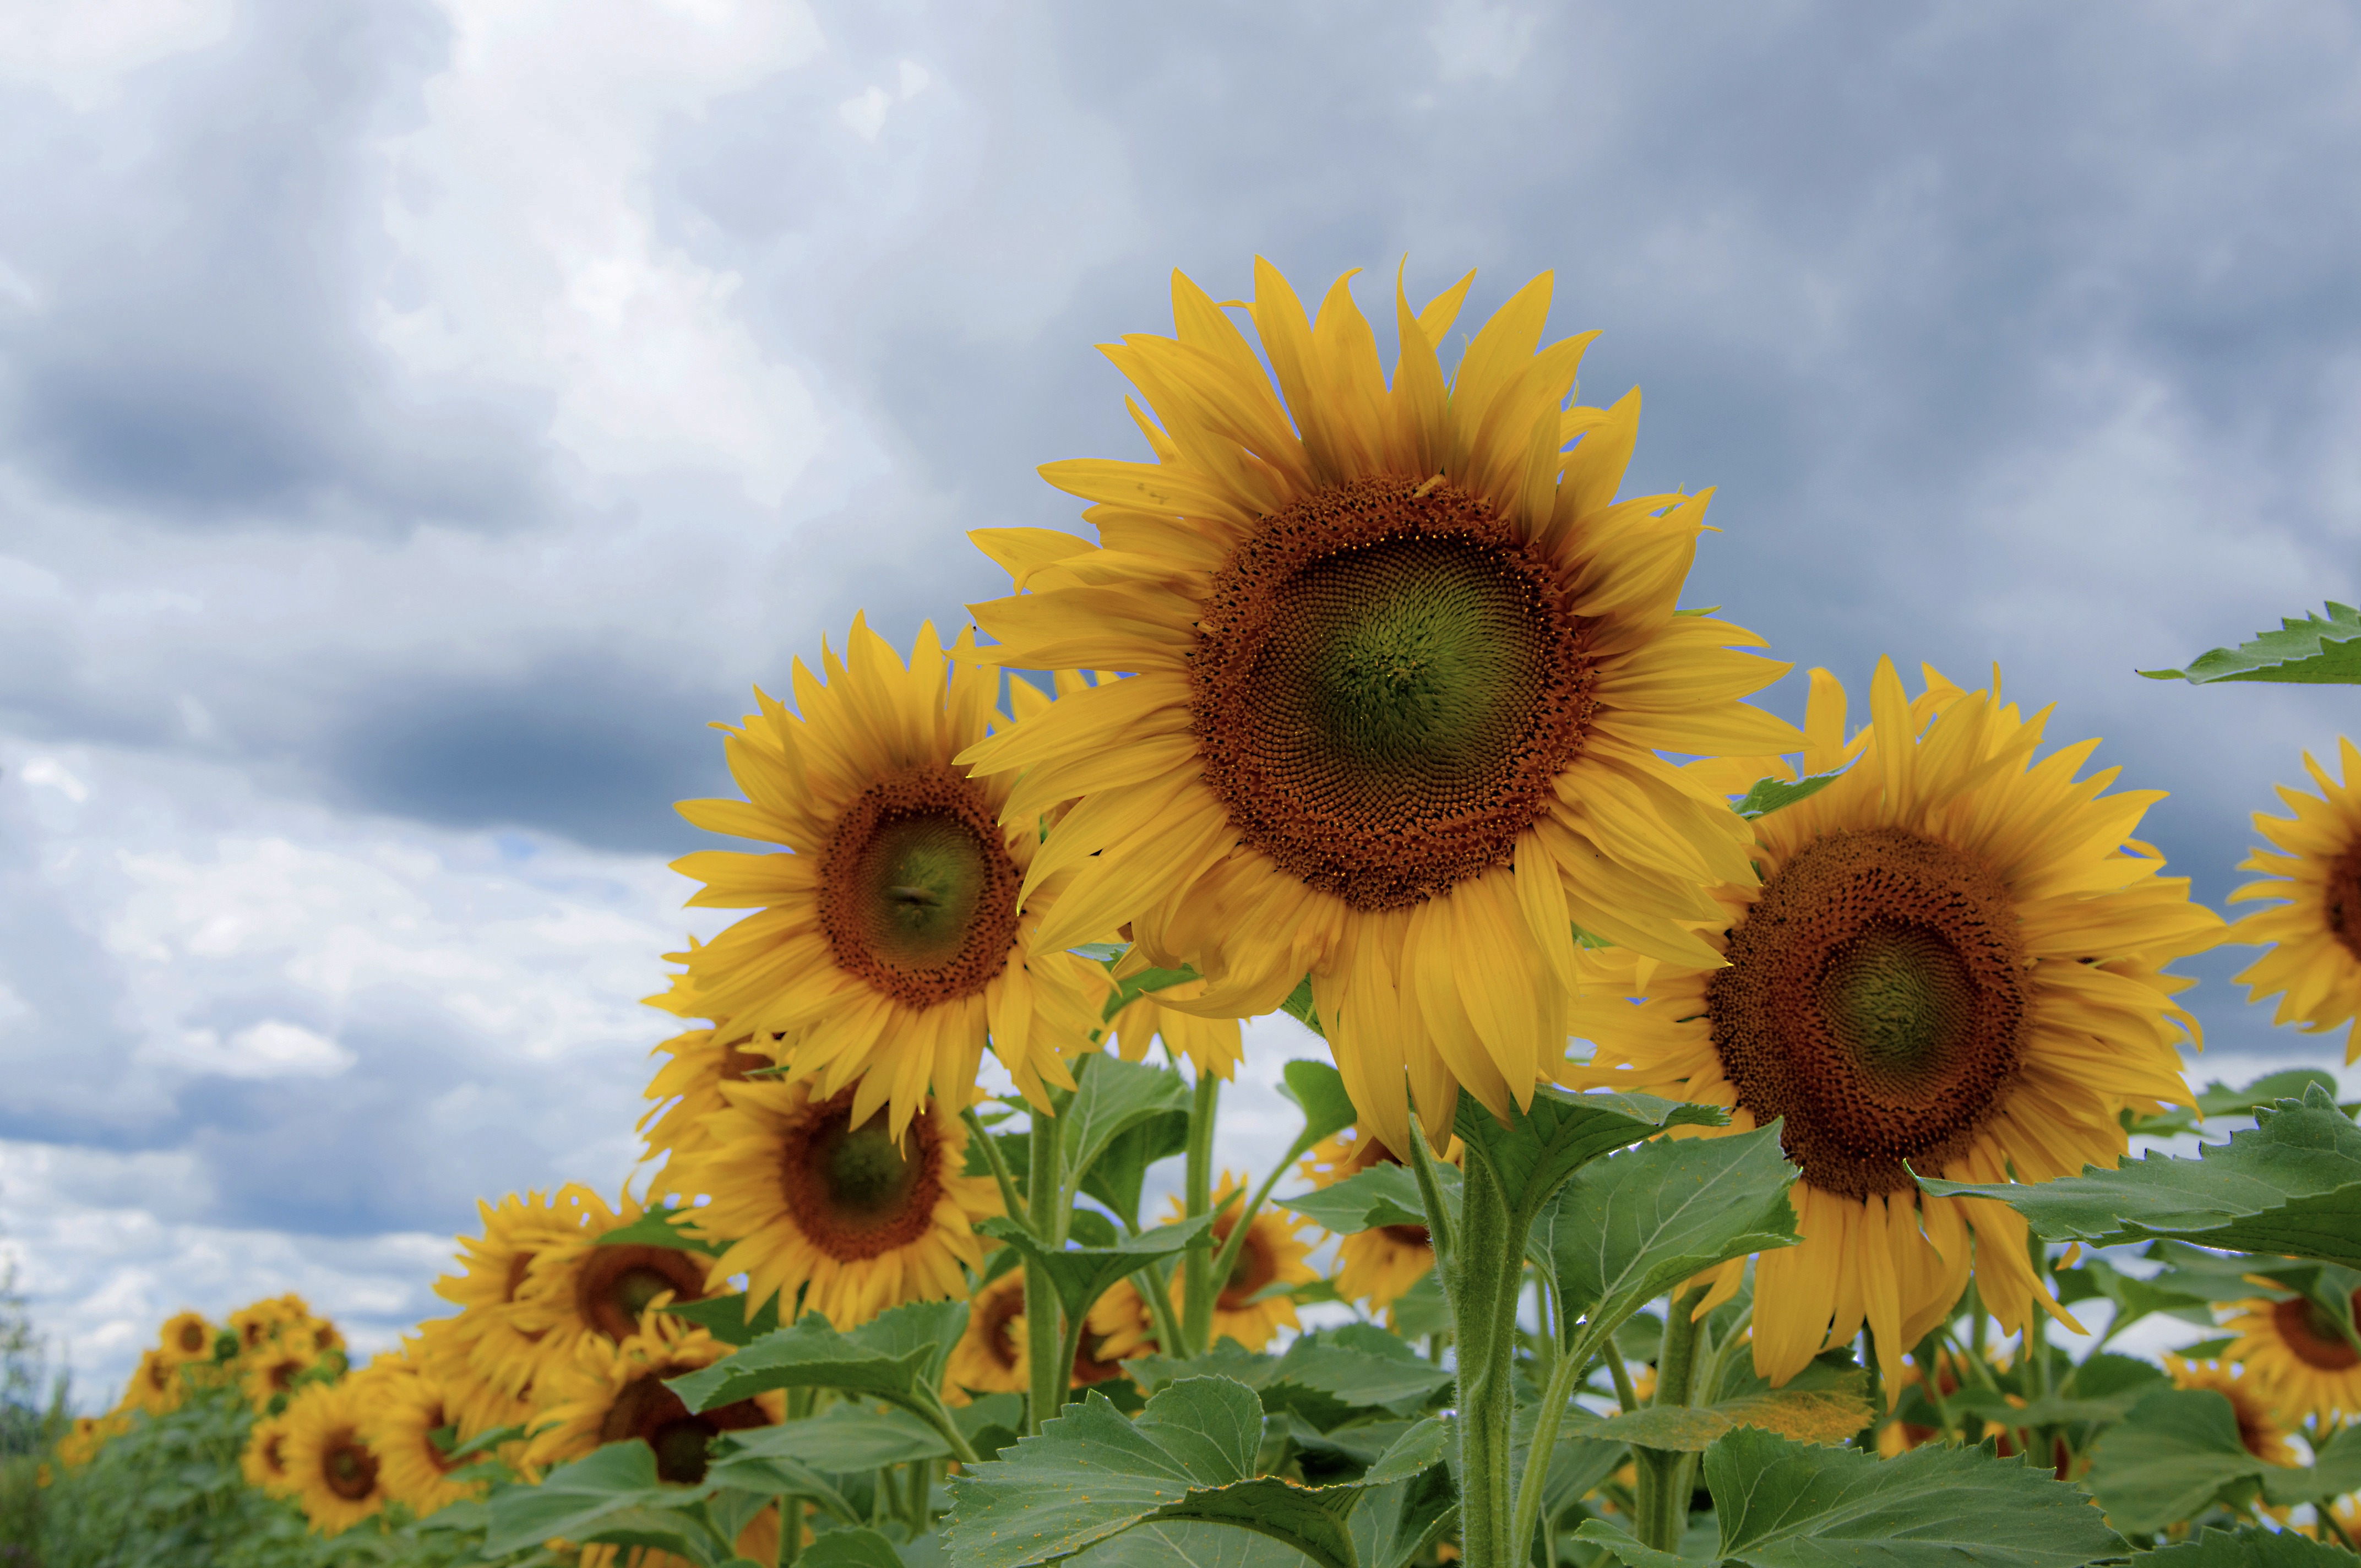 A field of sunflowers - free photo